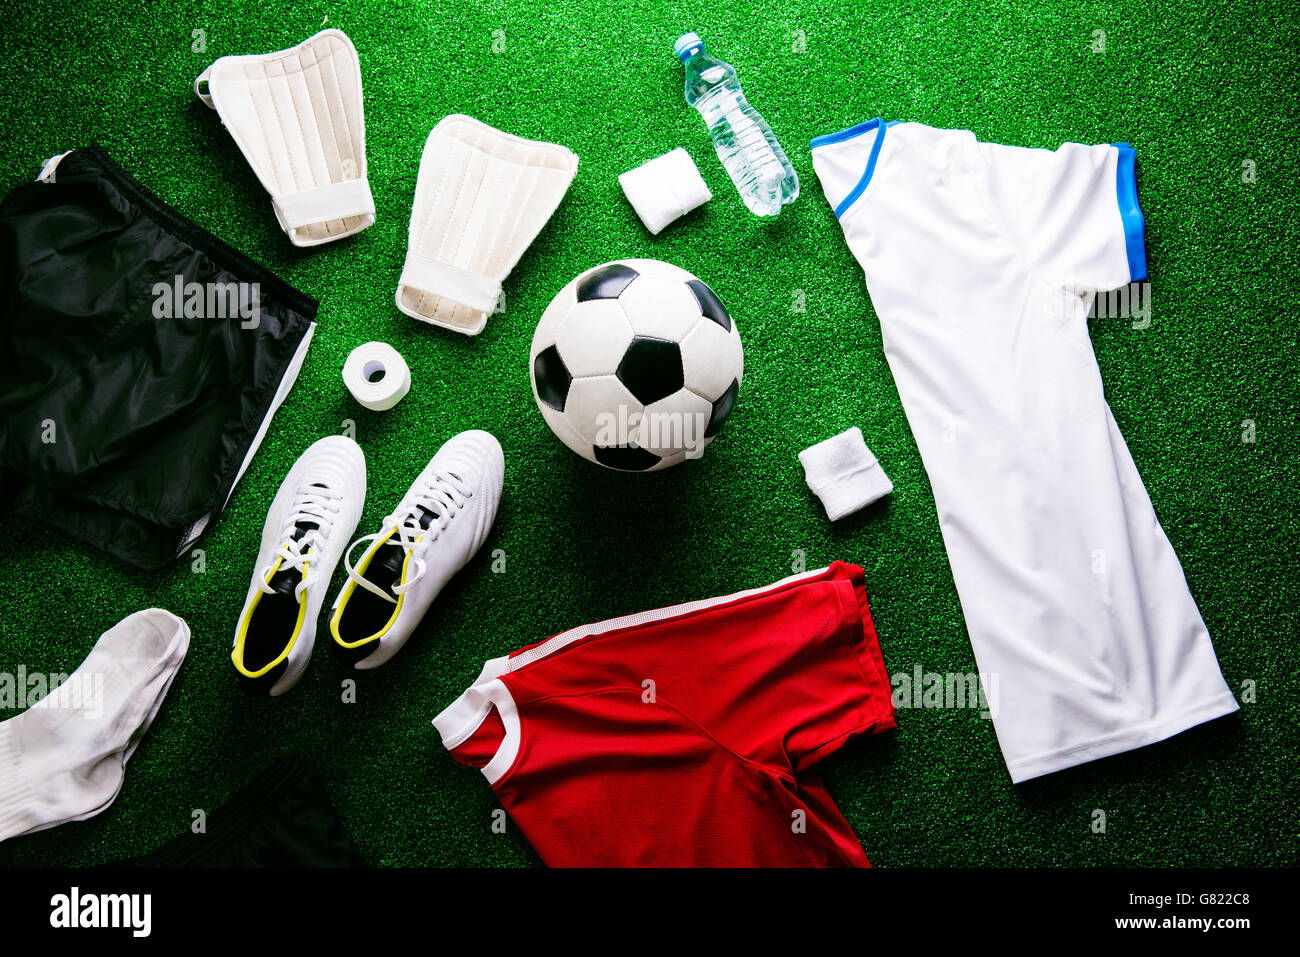 Soccer ball,cleats and various football stuff against artificial Stock Photo